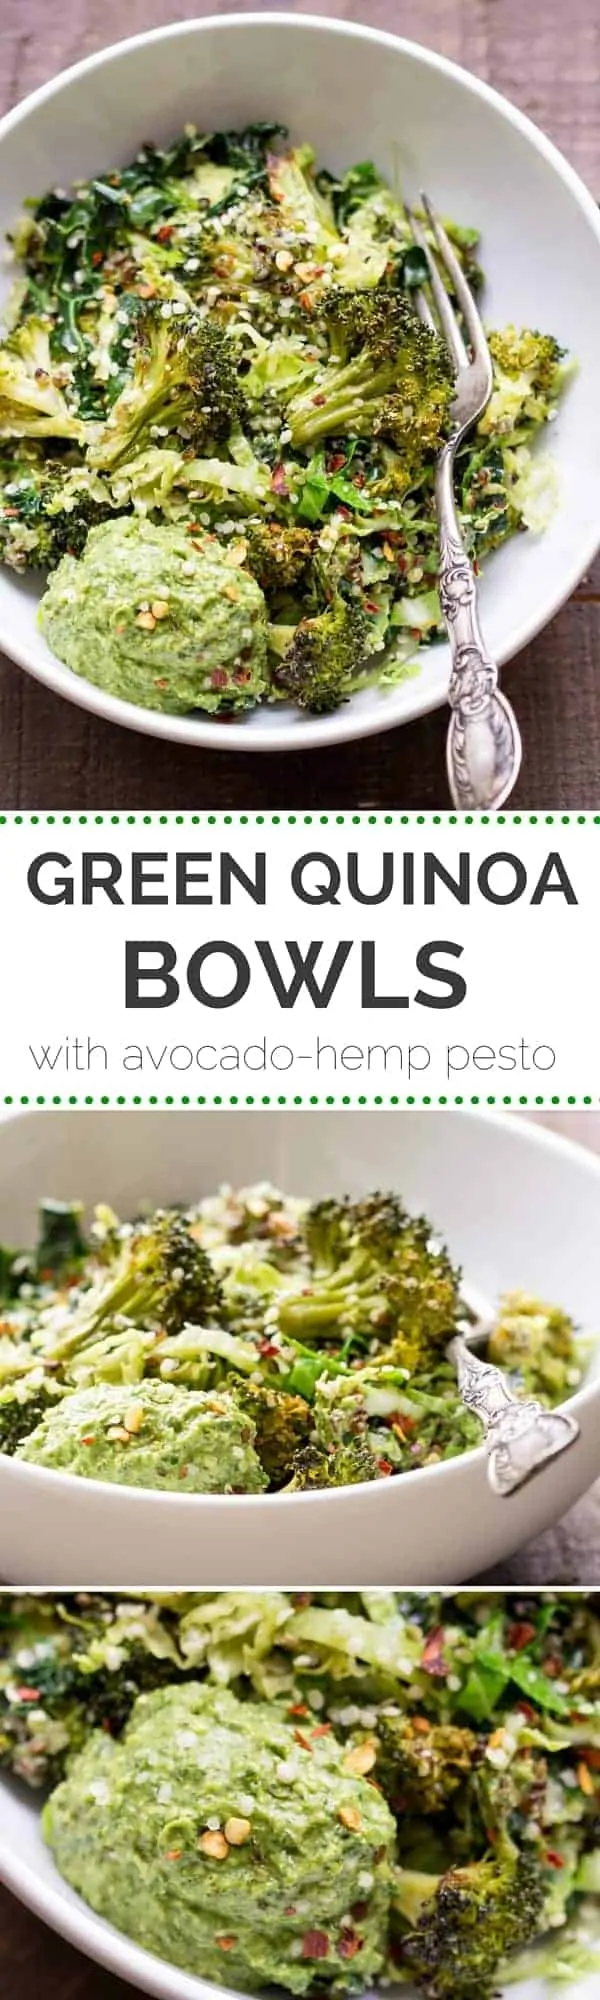 SUPER GREEN QUINOA BOWLS -- with kale, brussels sprouts, broccoli and a vegan avocado-hemp pesto